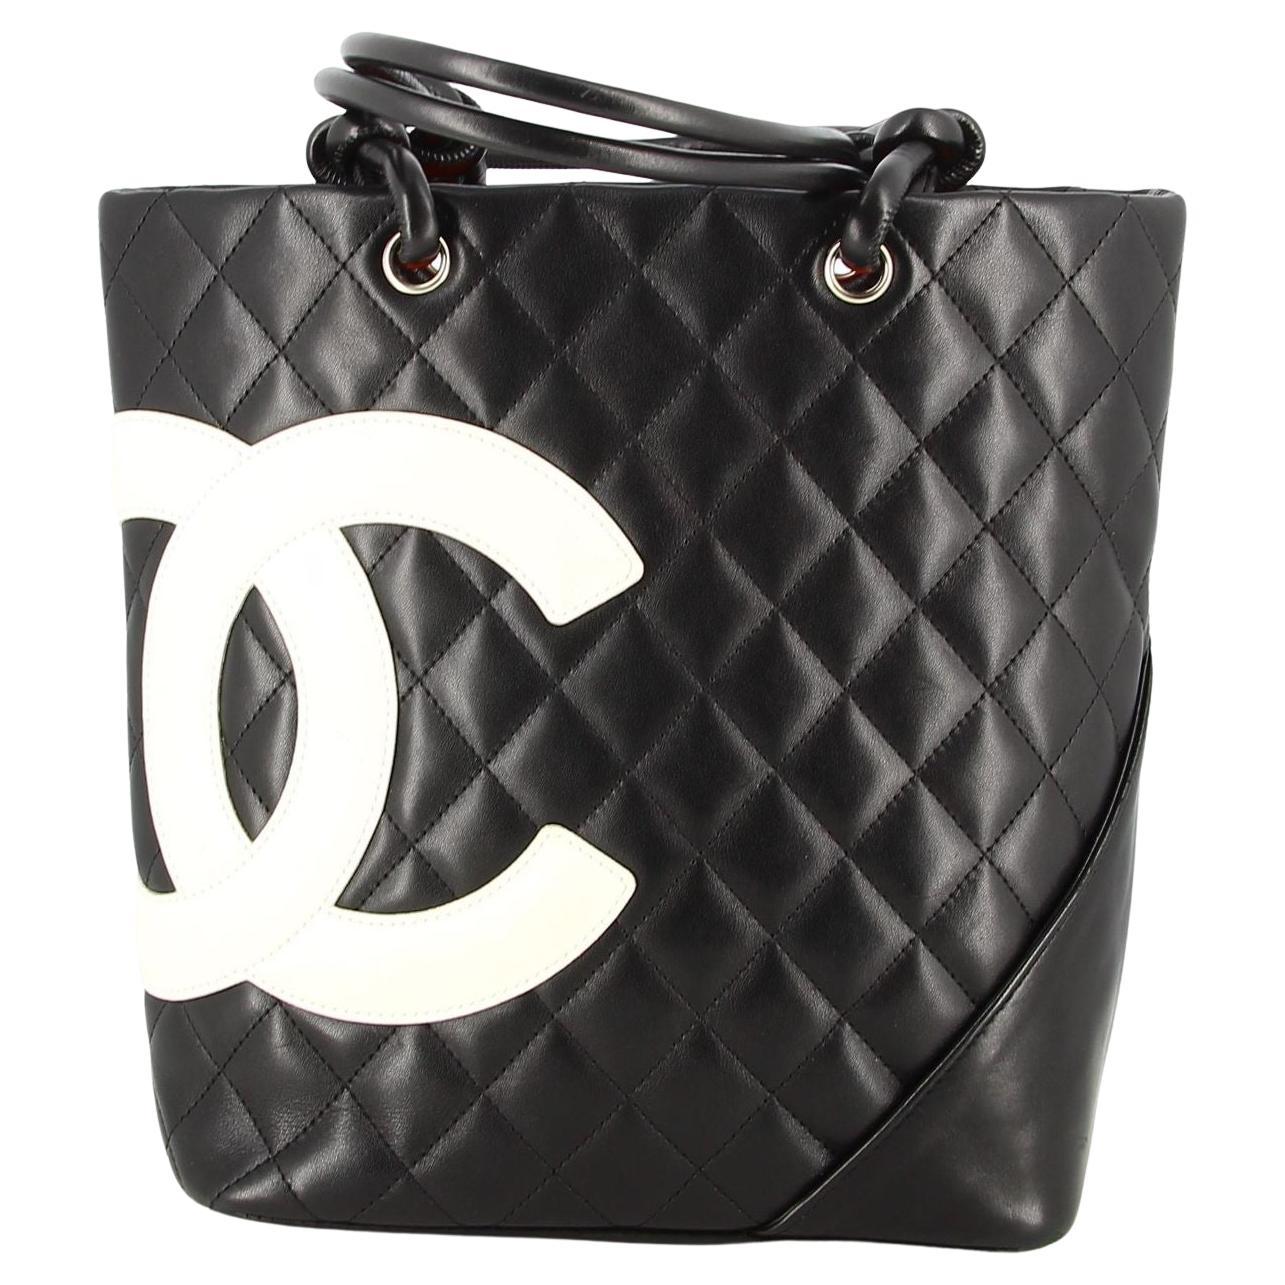 2004-2005 Chanel Cambon Black Leather Bag at 1stDibs  2005 chanel bag,  chanel 2005 bag collection, chanel bag 2005